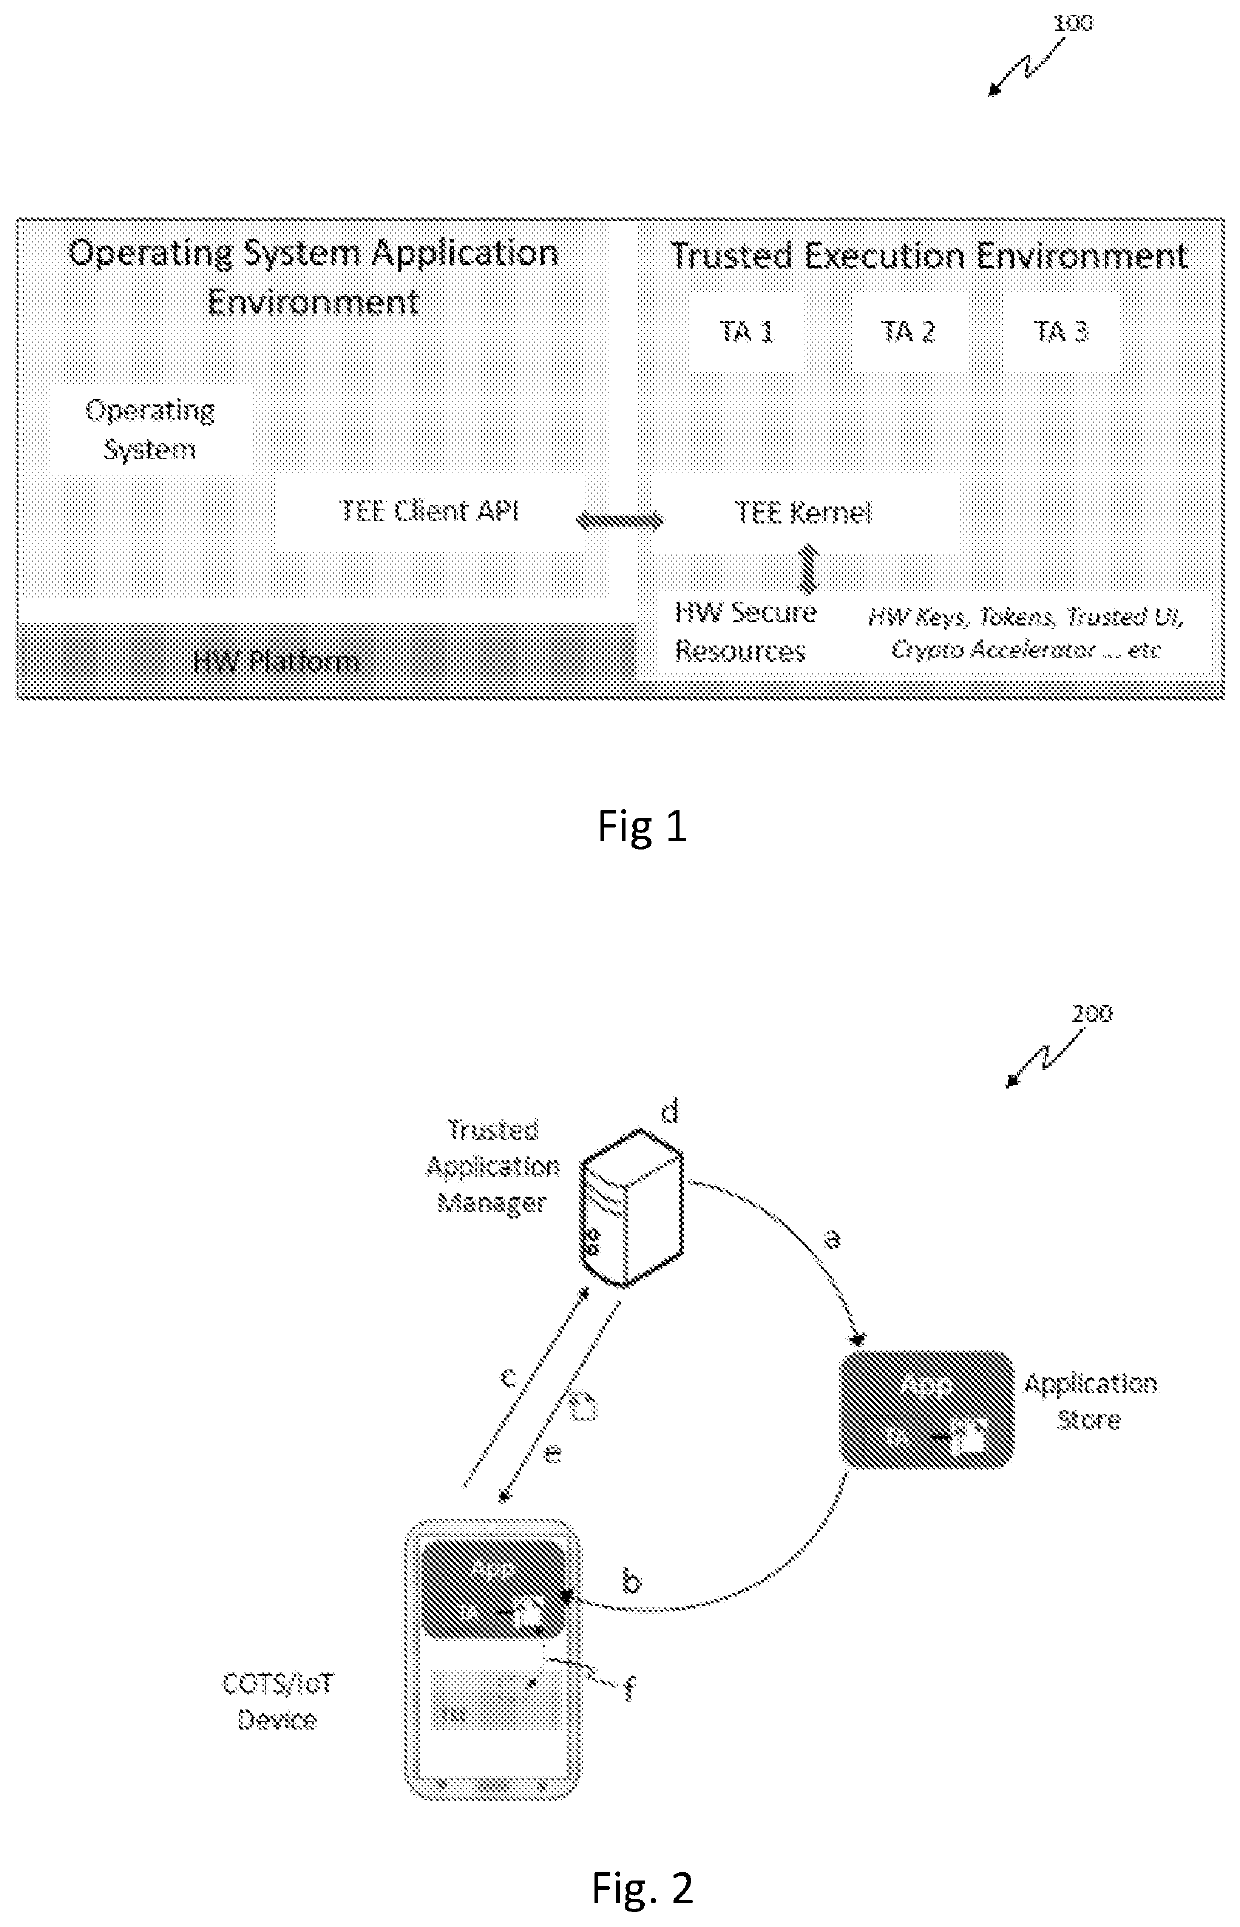 Method for processing a secure financial transaction using a commercial off-the-shelf or an internet of things device